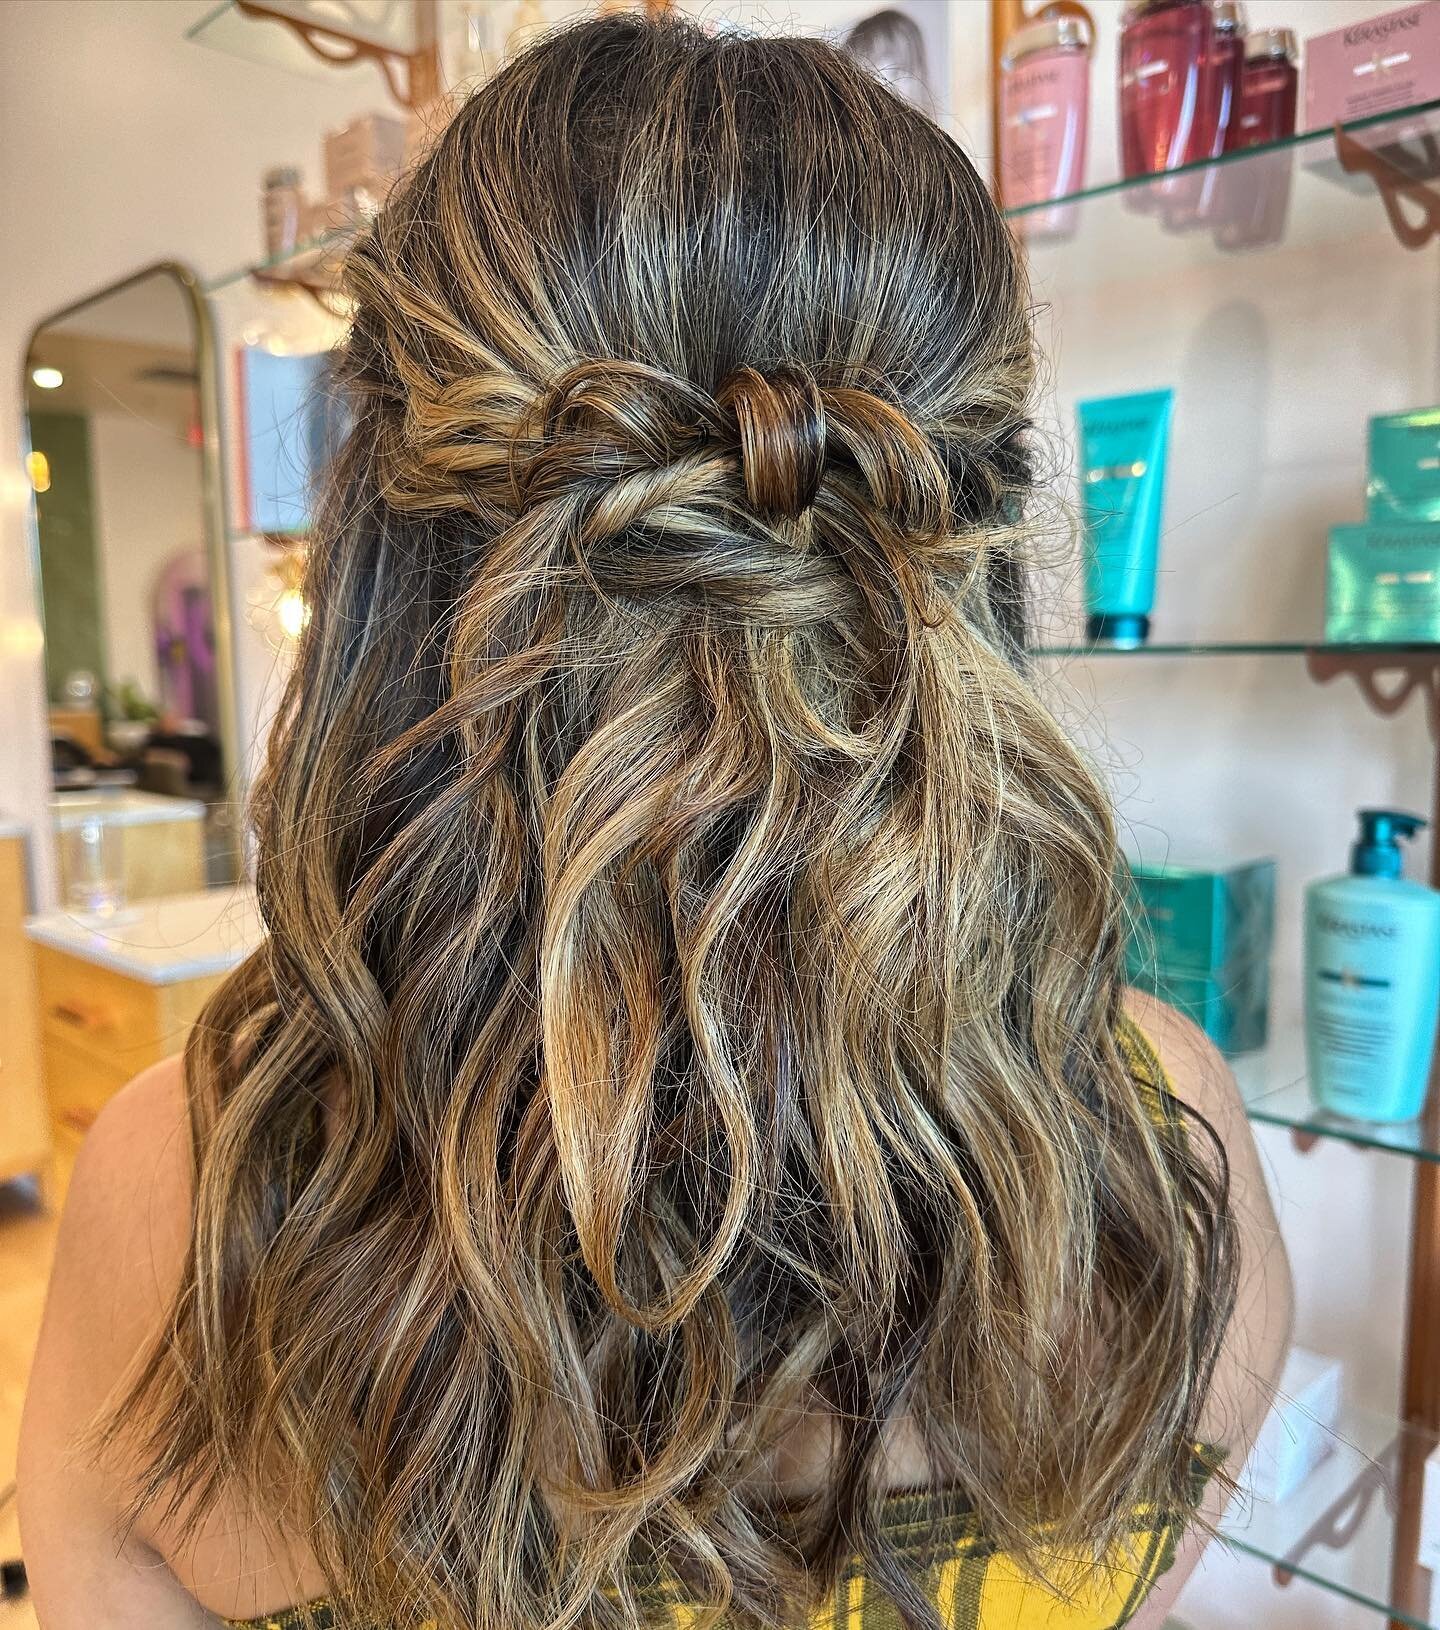 We do special event hair too!!

Call to book your next special look🧚🏼&zwj;♀️